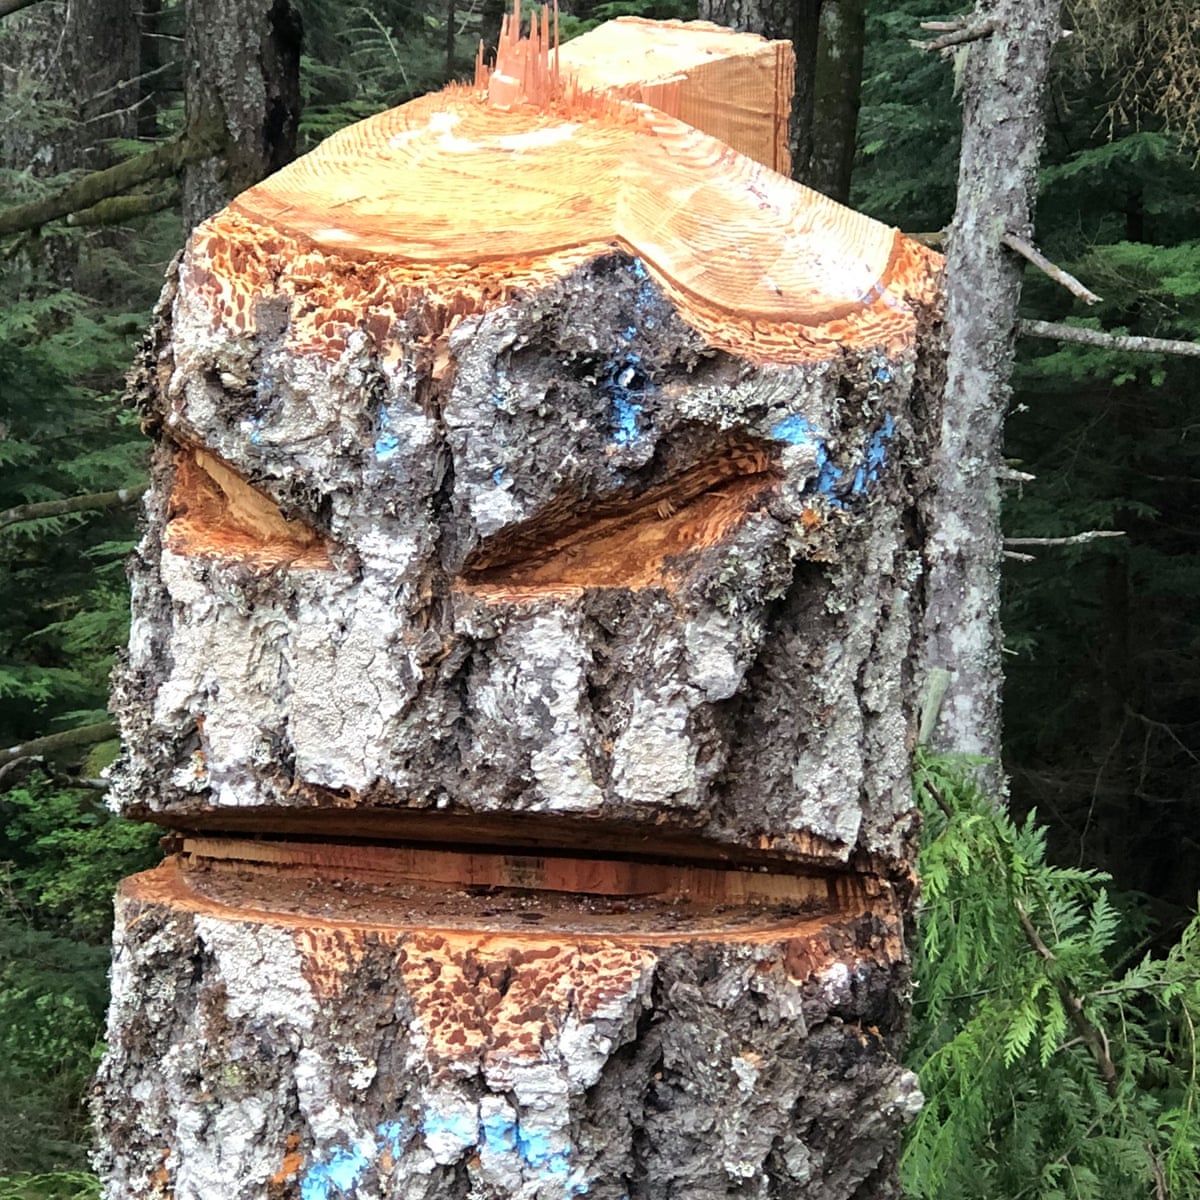 Chainsaw massacre: tree poaching hits Canada amid lumber shortage | Trees  and forests | The Guardian